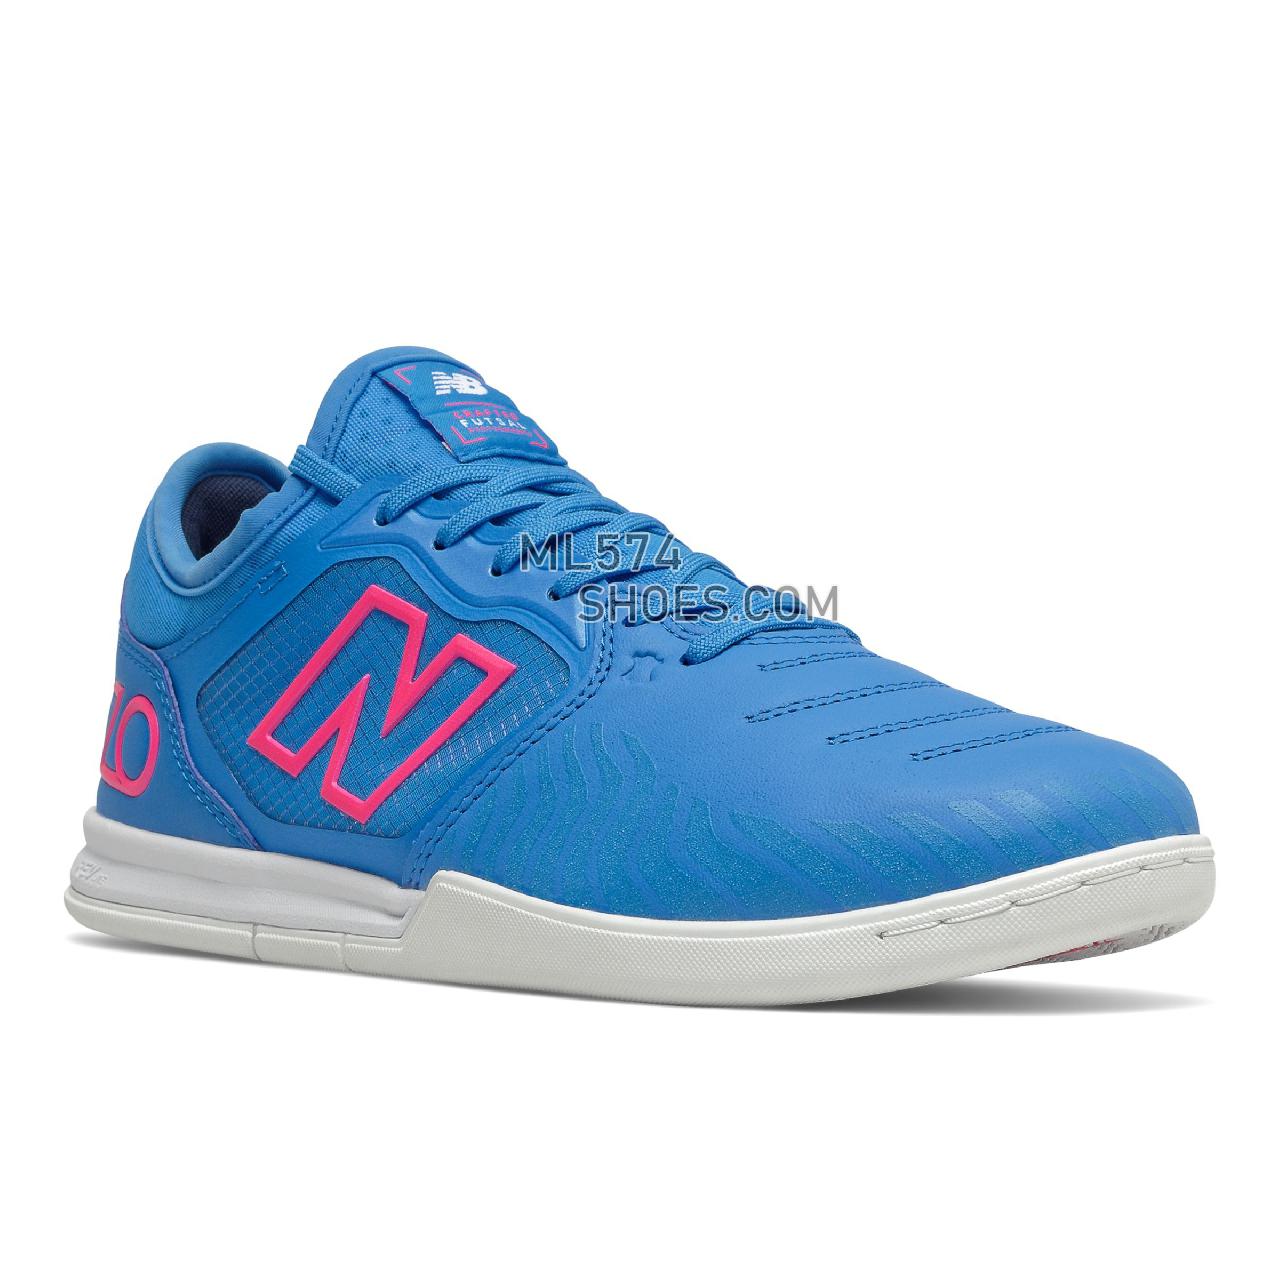 New Balance audazo V5+ Pro IN - Men's Turf FootBall Boots - Helium with Pink Glo and White - MSA1IH55